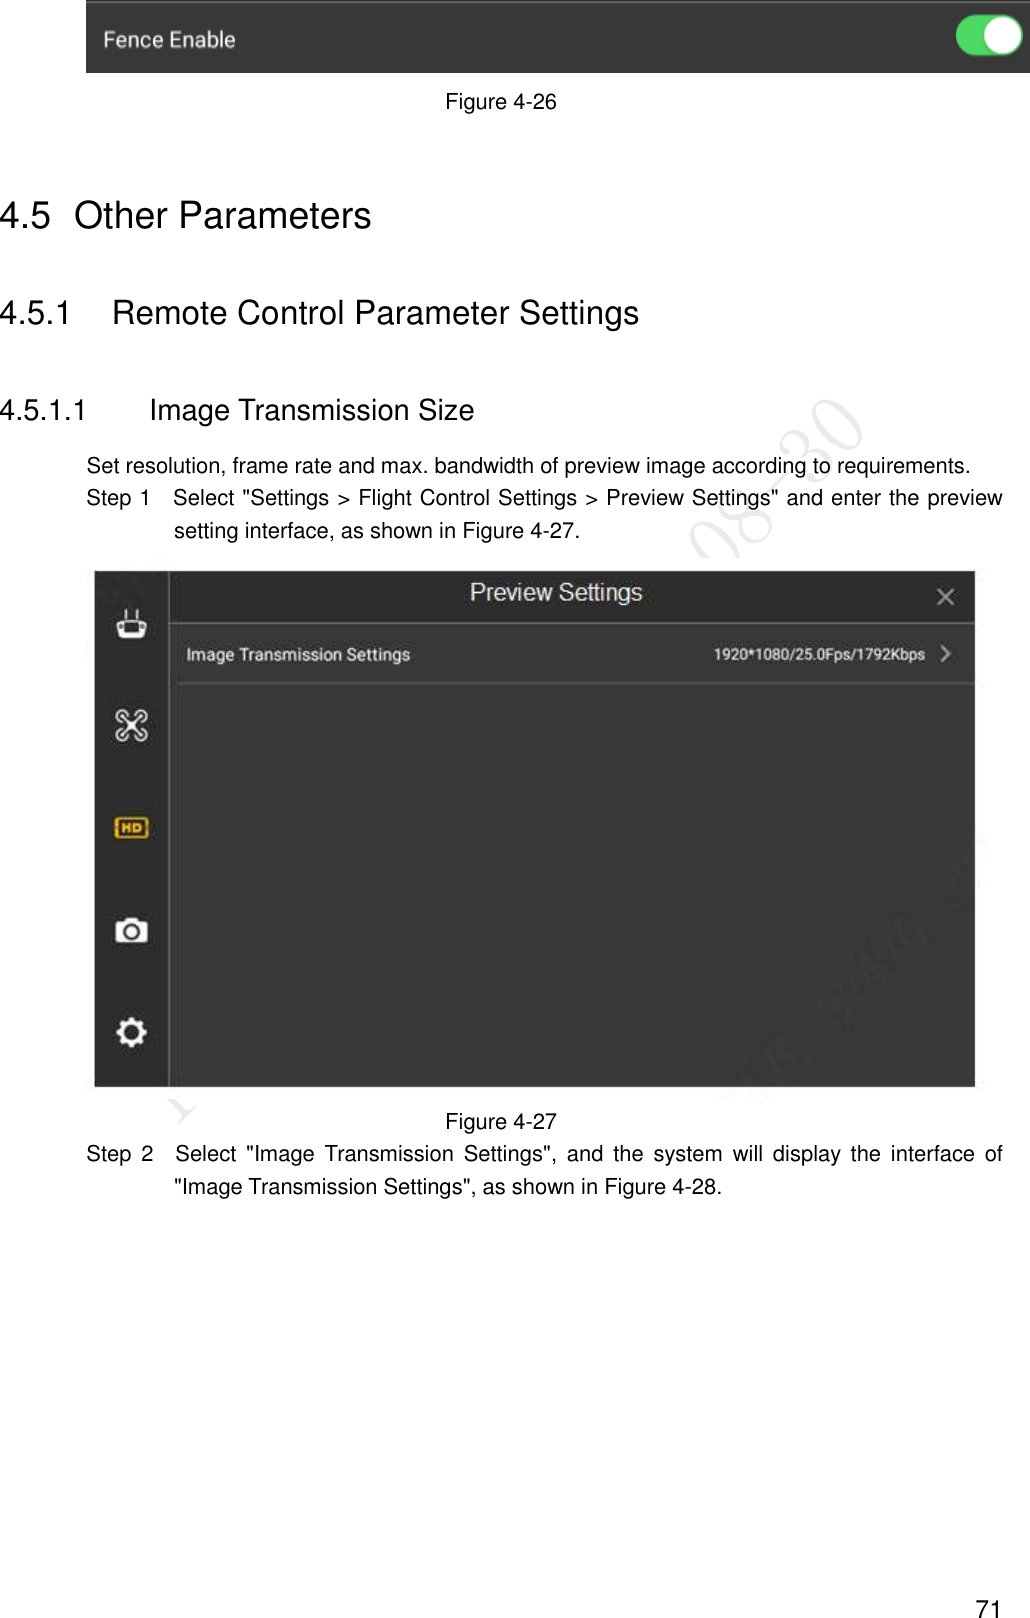  71  Figure 4-26 4.5  Other Parameters   4.5.1  Remote Control Parameter Settings 4.5.1.1  Image Transmission Size Set resolution, frame rate and max. bandwidth of preview image according to requirements.                 Step 1    Select &quot;Settings &gt; Flight Control Settings &gt; Preview Settings&quot; and enter the preview setting interface, as shown in Figure 4-27.  Figure 4-27                 Step  2  Select  &quot;Image  Transmission  Settings&quot;,  and  the system  will  display the  interface  of &quot;Image Transmission Settings&quot;, as shown in Figure 4-28. 